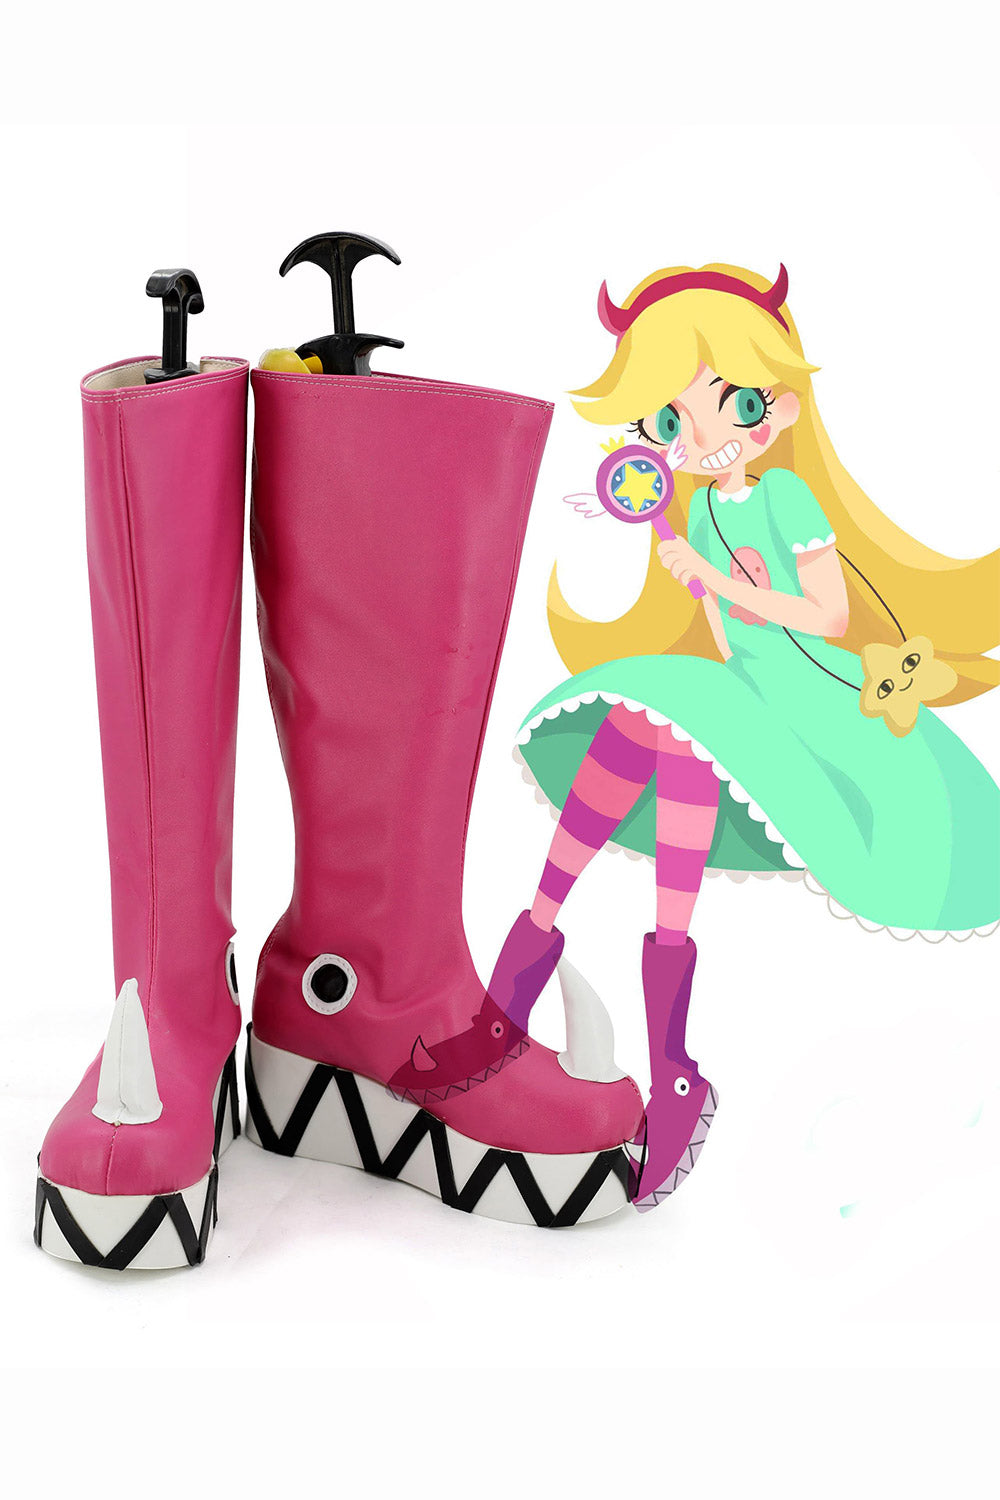 Star Butterfly Princesse Bottes Cosplay Chaussures